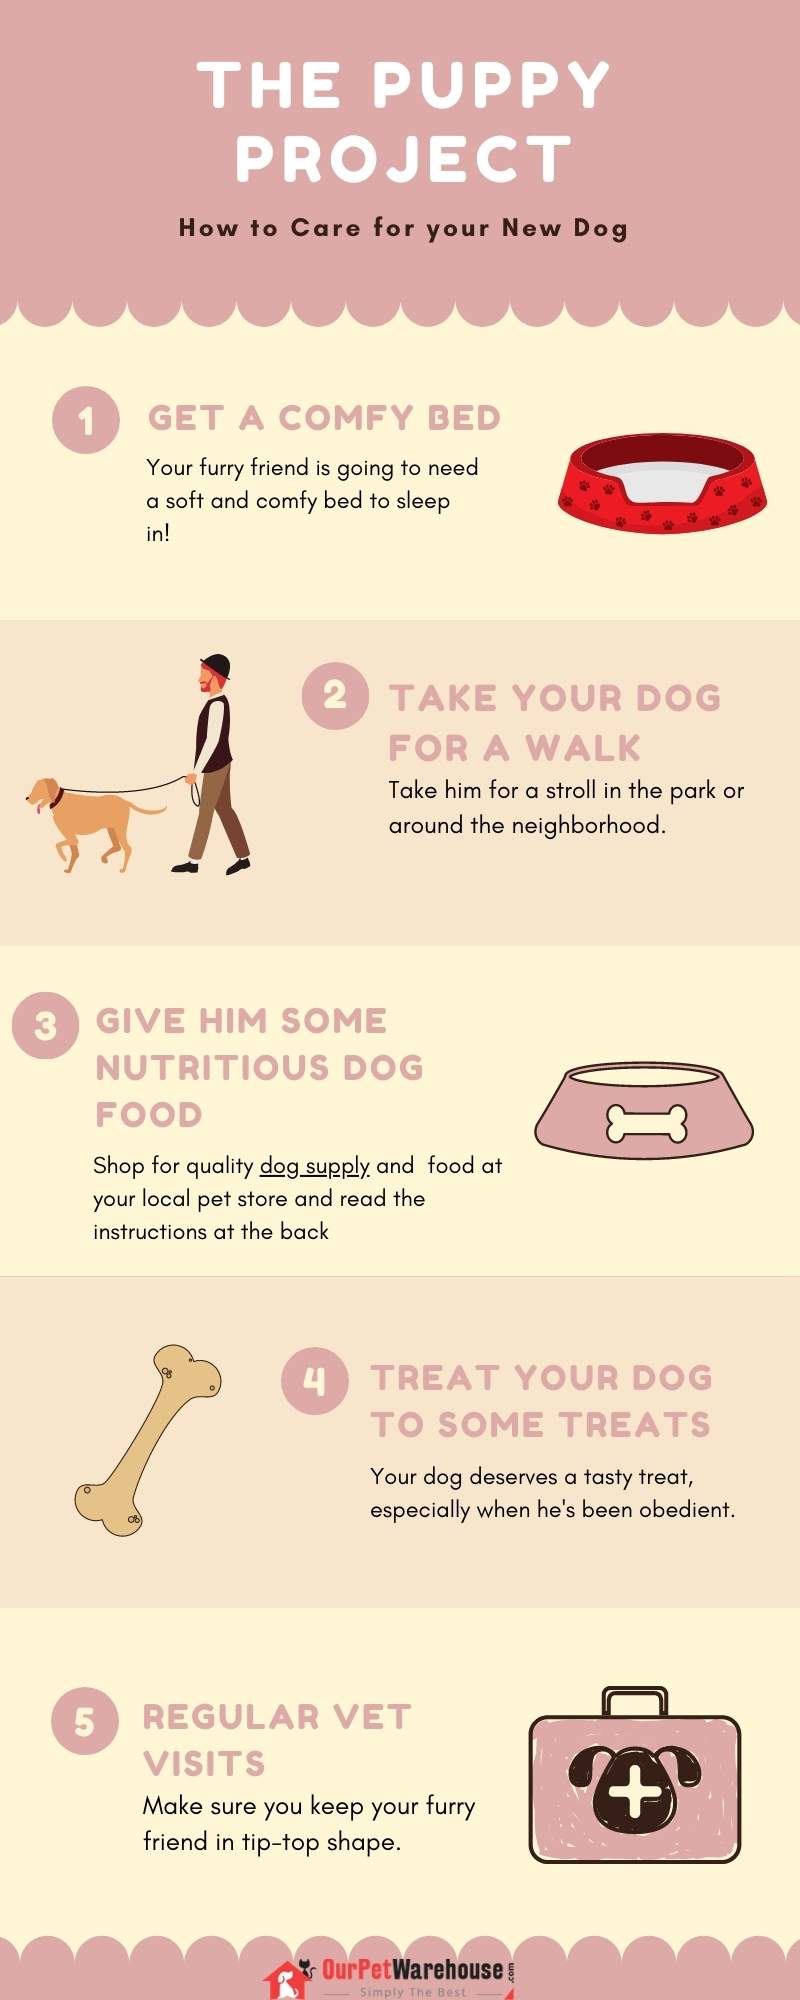 How To Care For Your New Dog - Infographic Portal